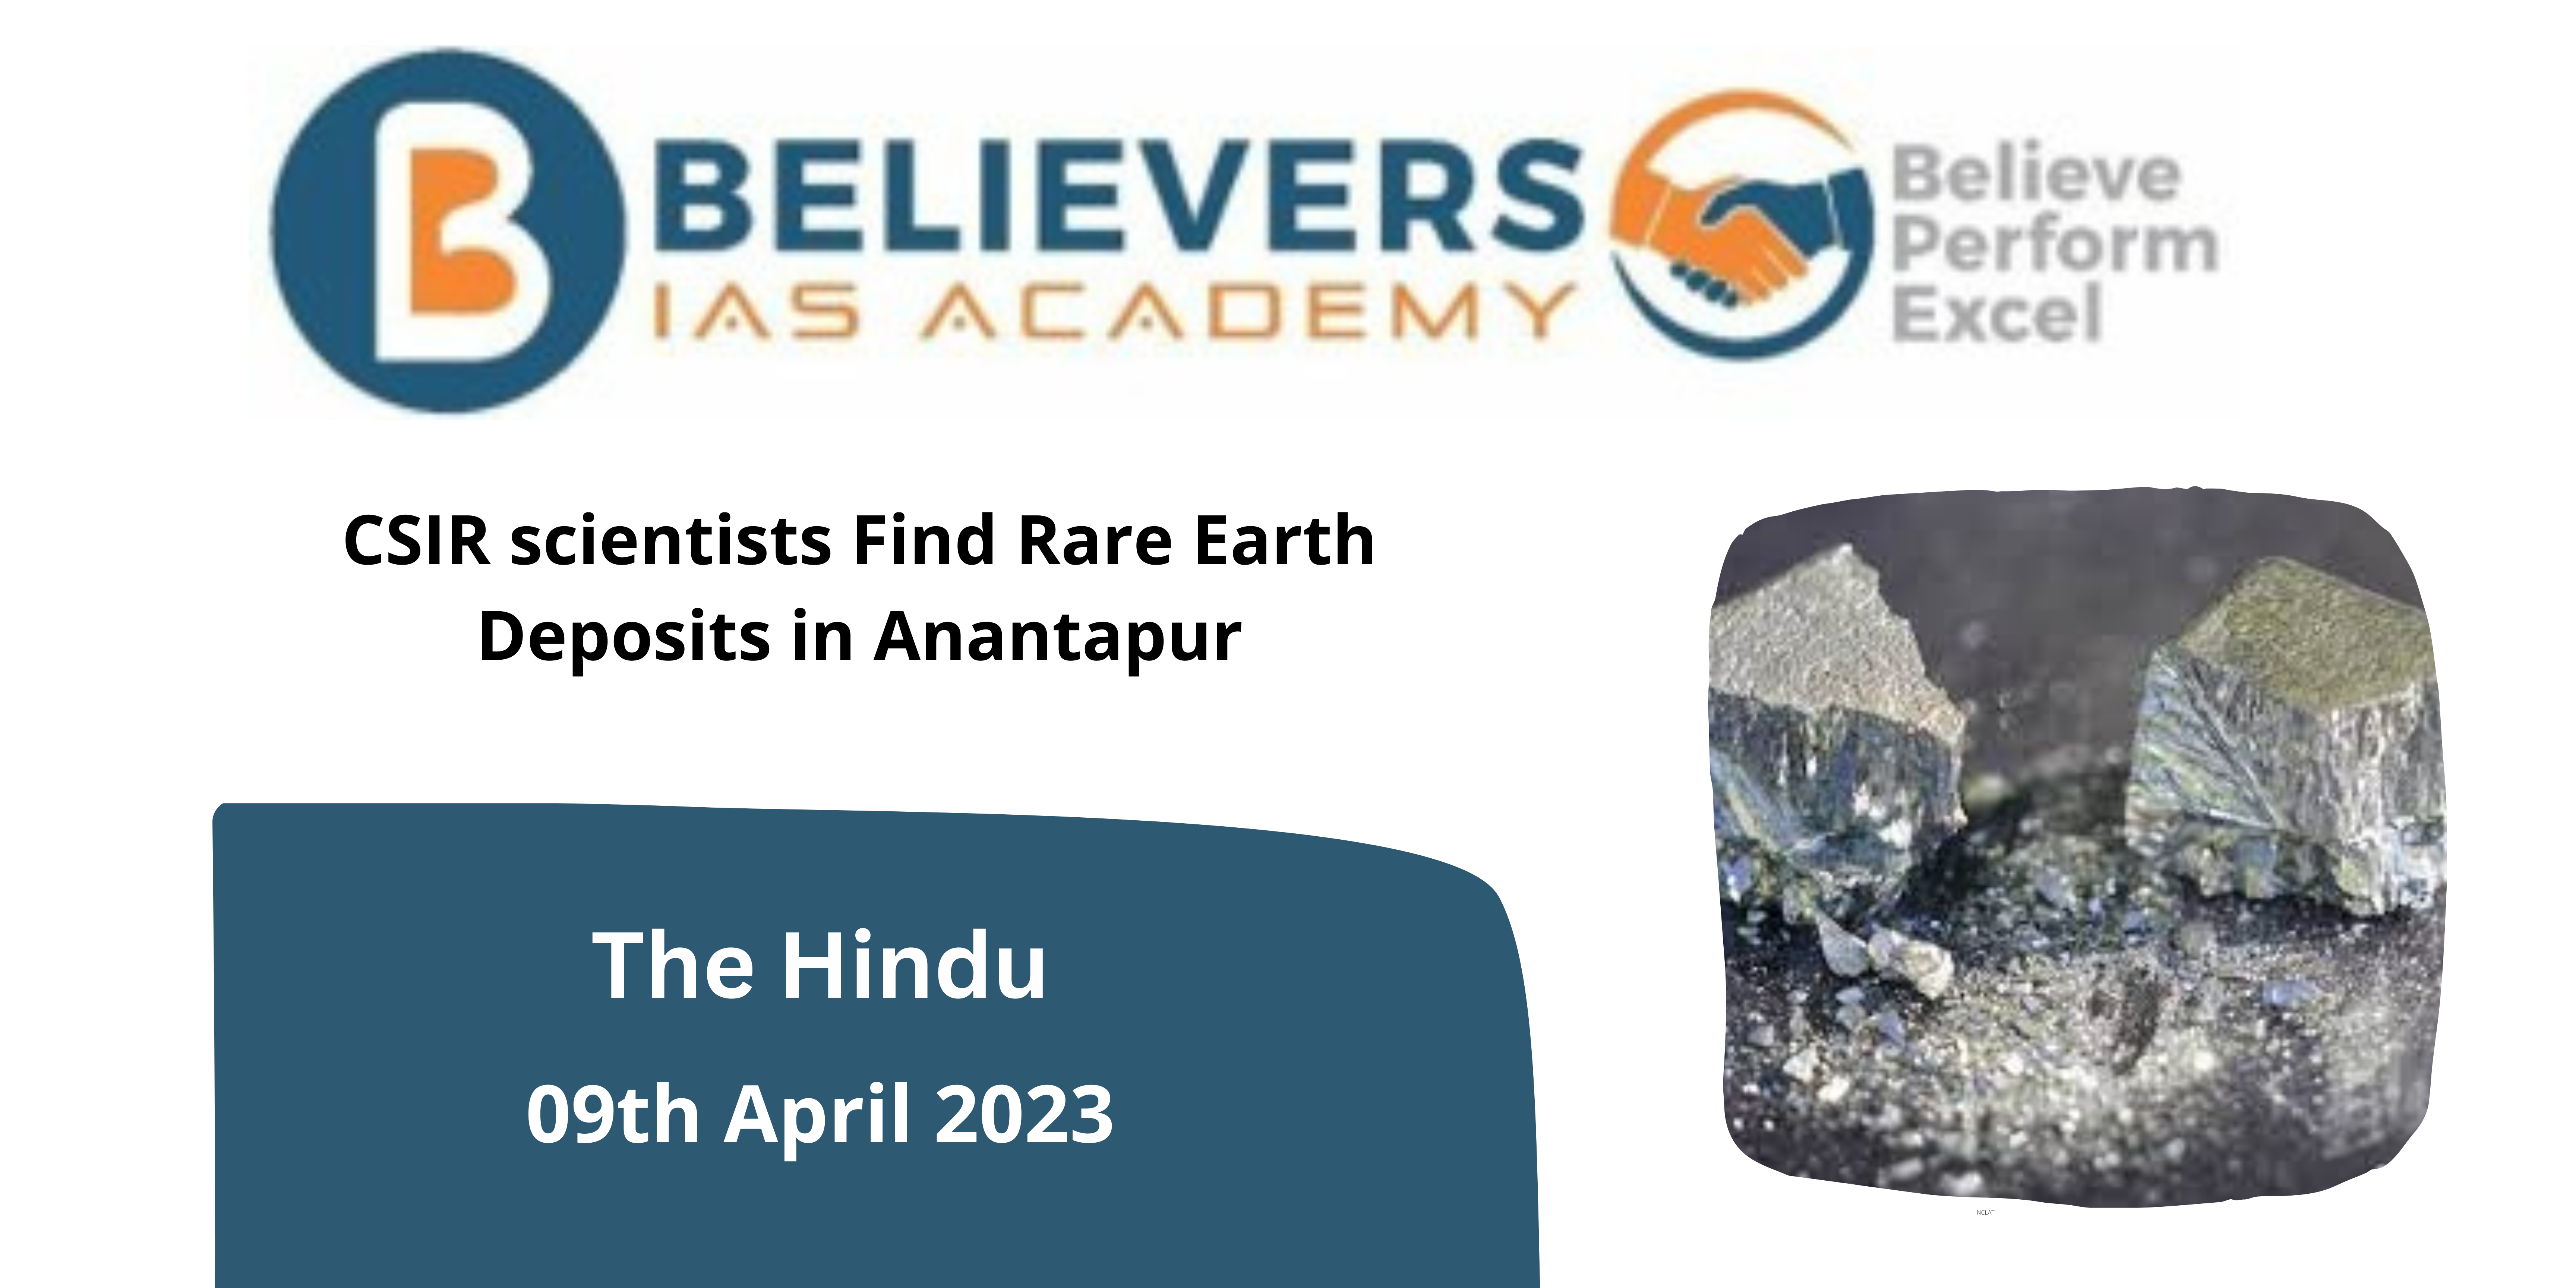 CSIR scientists Find Rare Earth Deposits in Anantapur